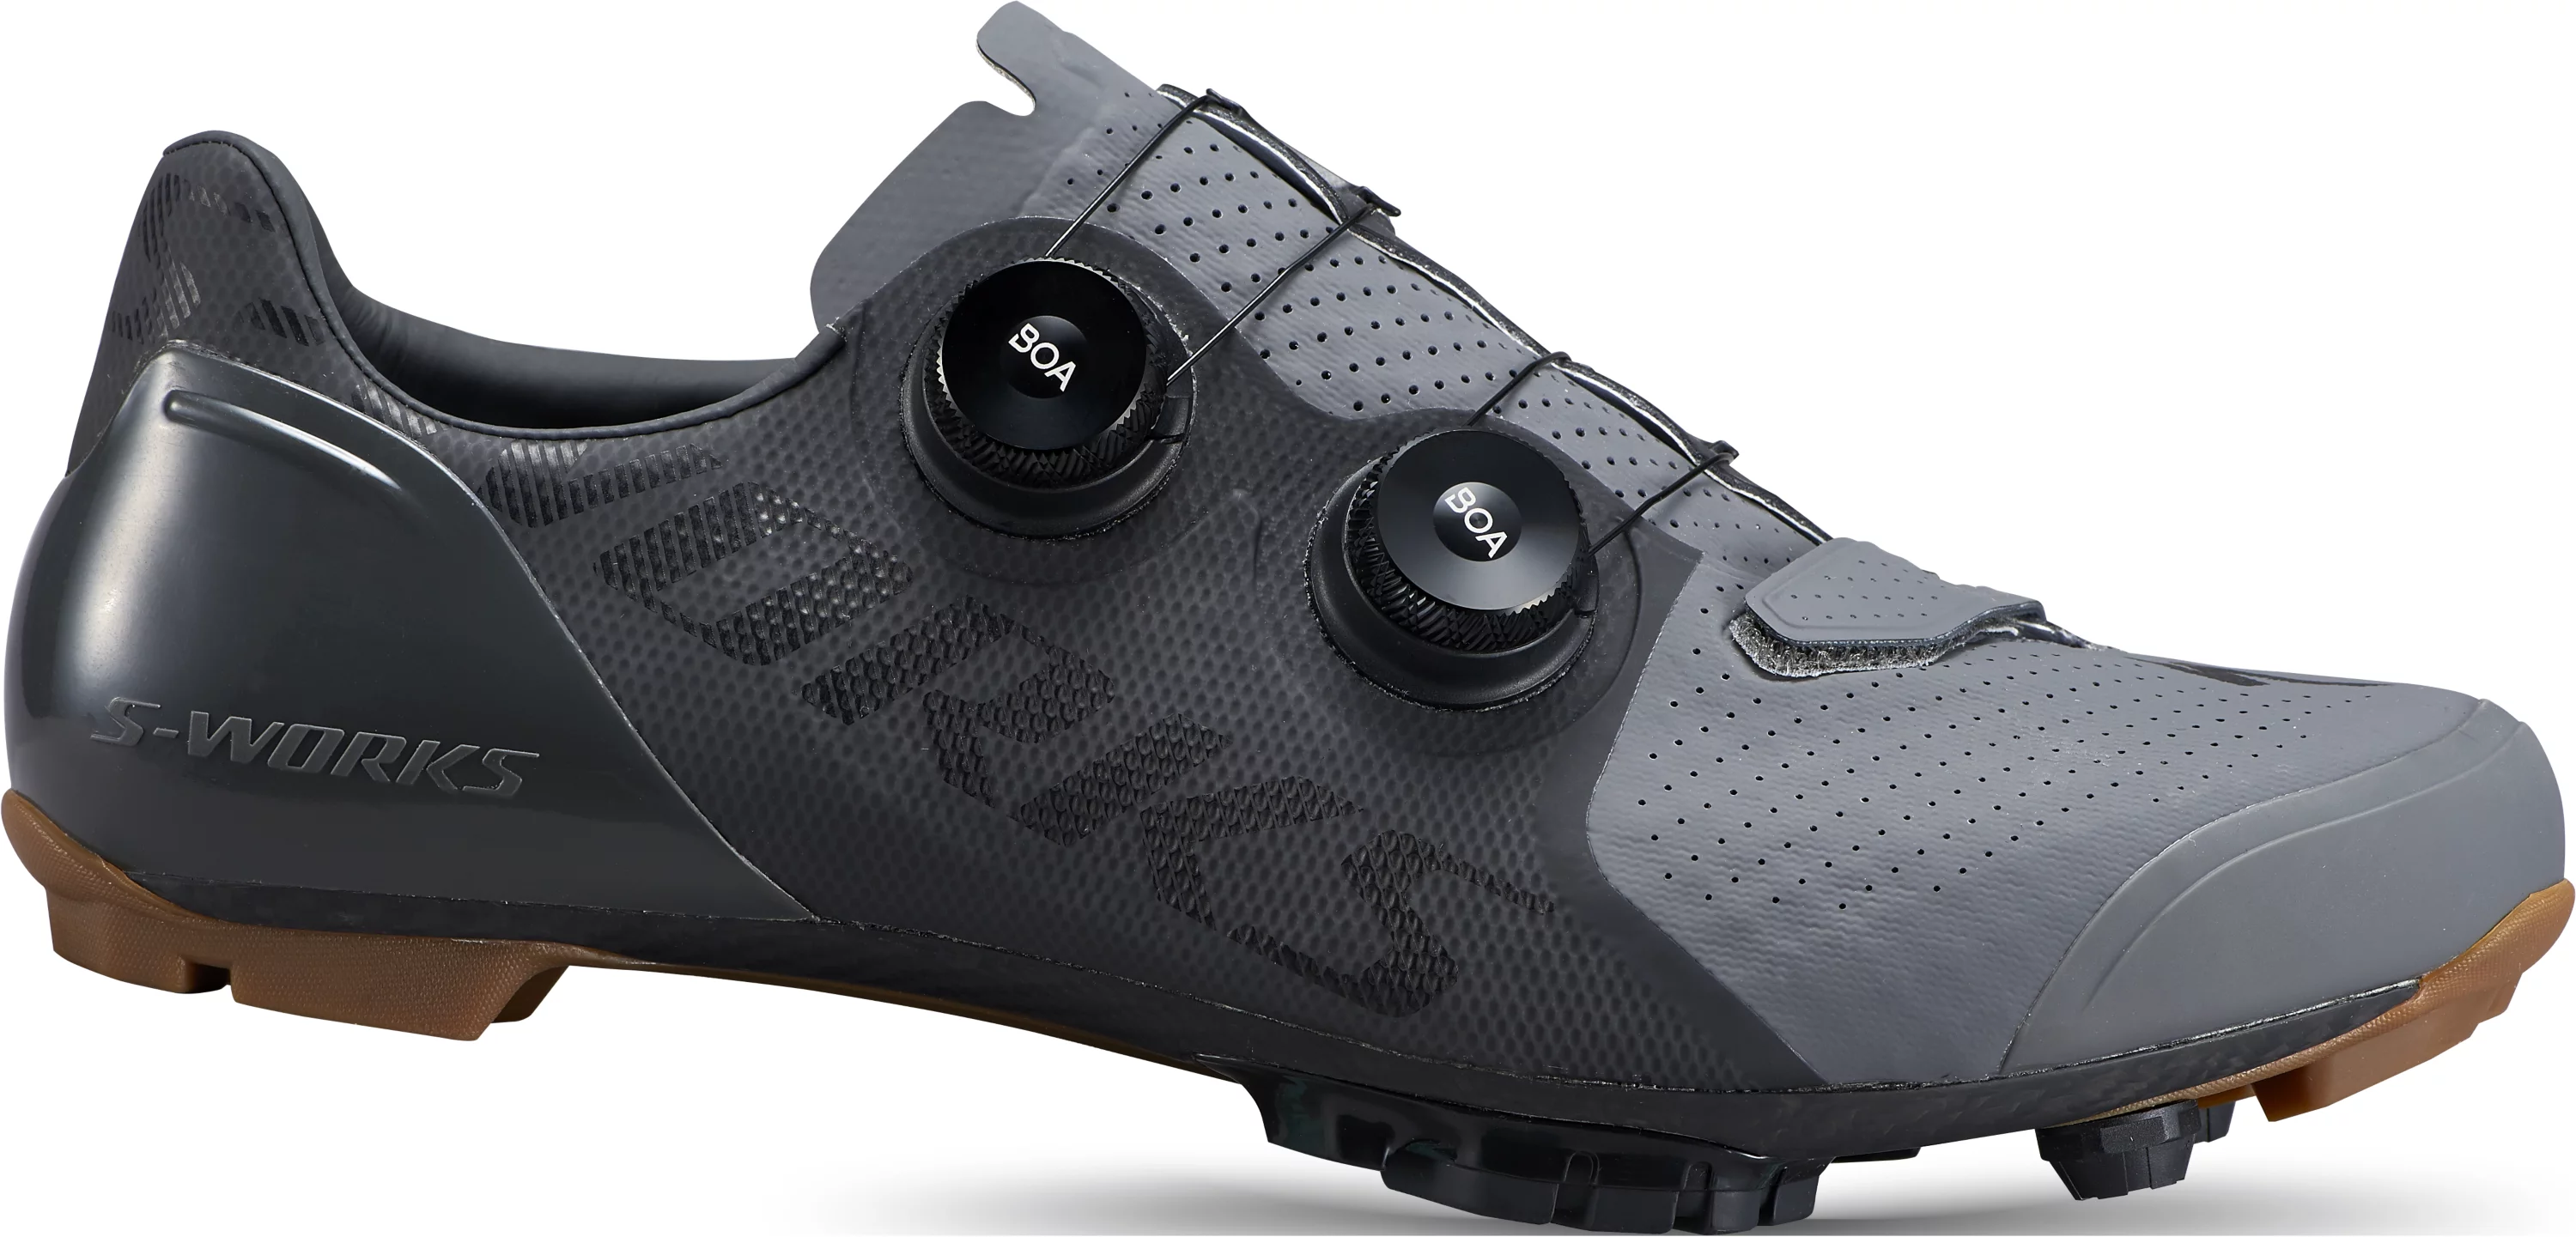 S-Works_Recon_Mountain_Bike_Shoes